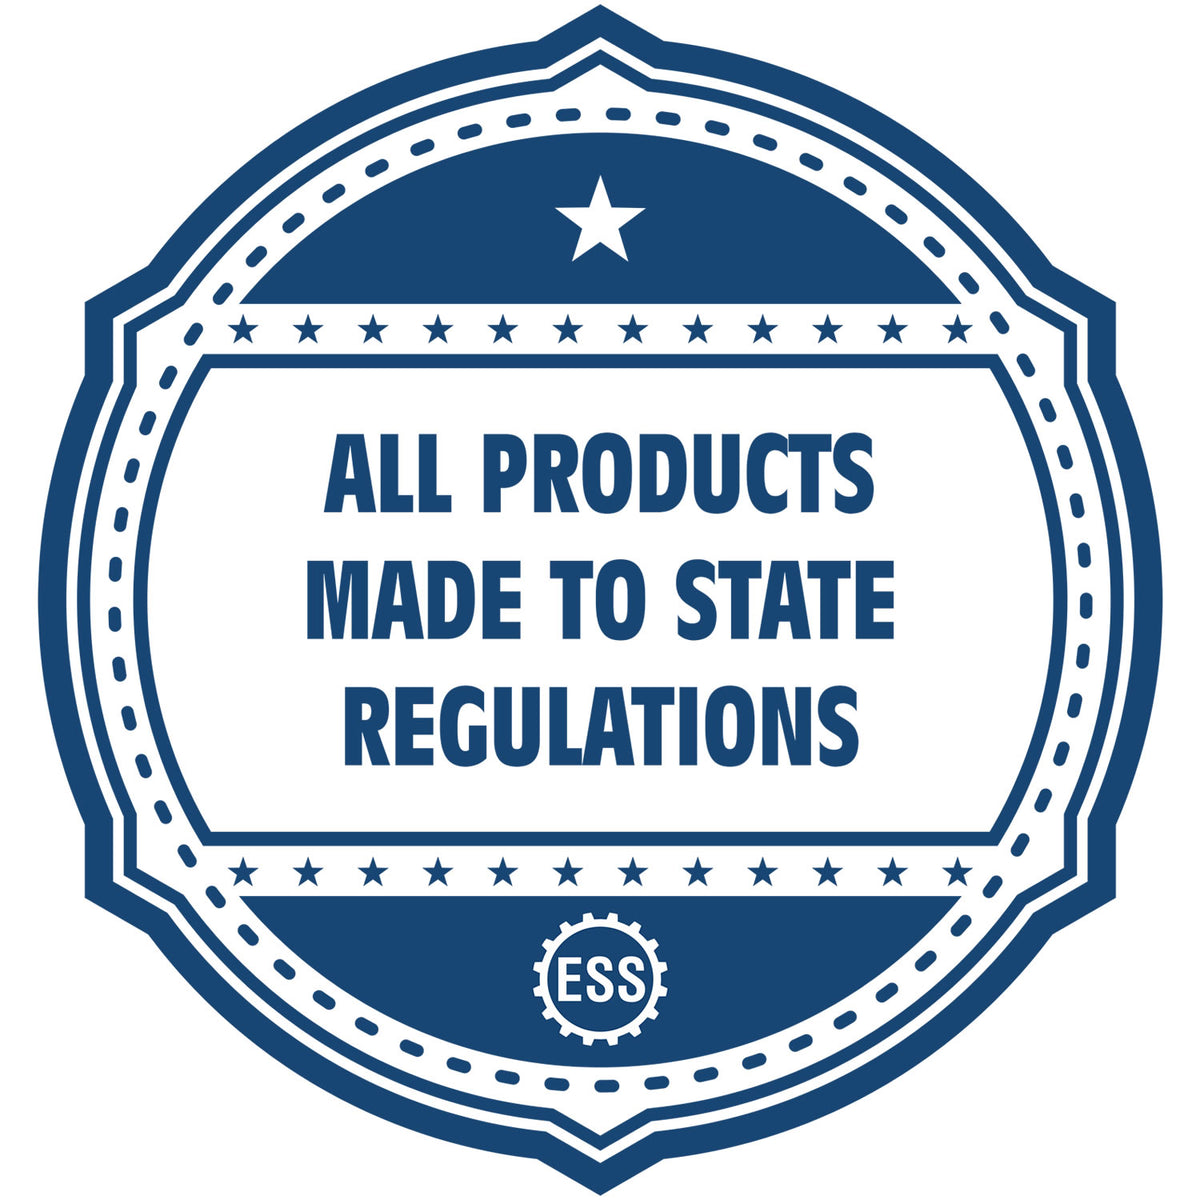 An icon or badge element for the Premium MaxLight Pre-Inked Ohio Landscape Architectural Stamp showing that this product is made in compliance with state regulations.